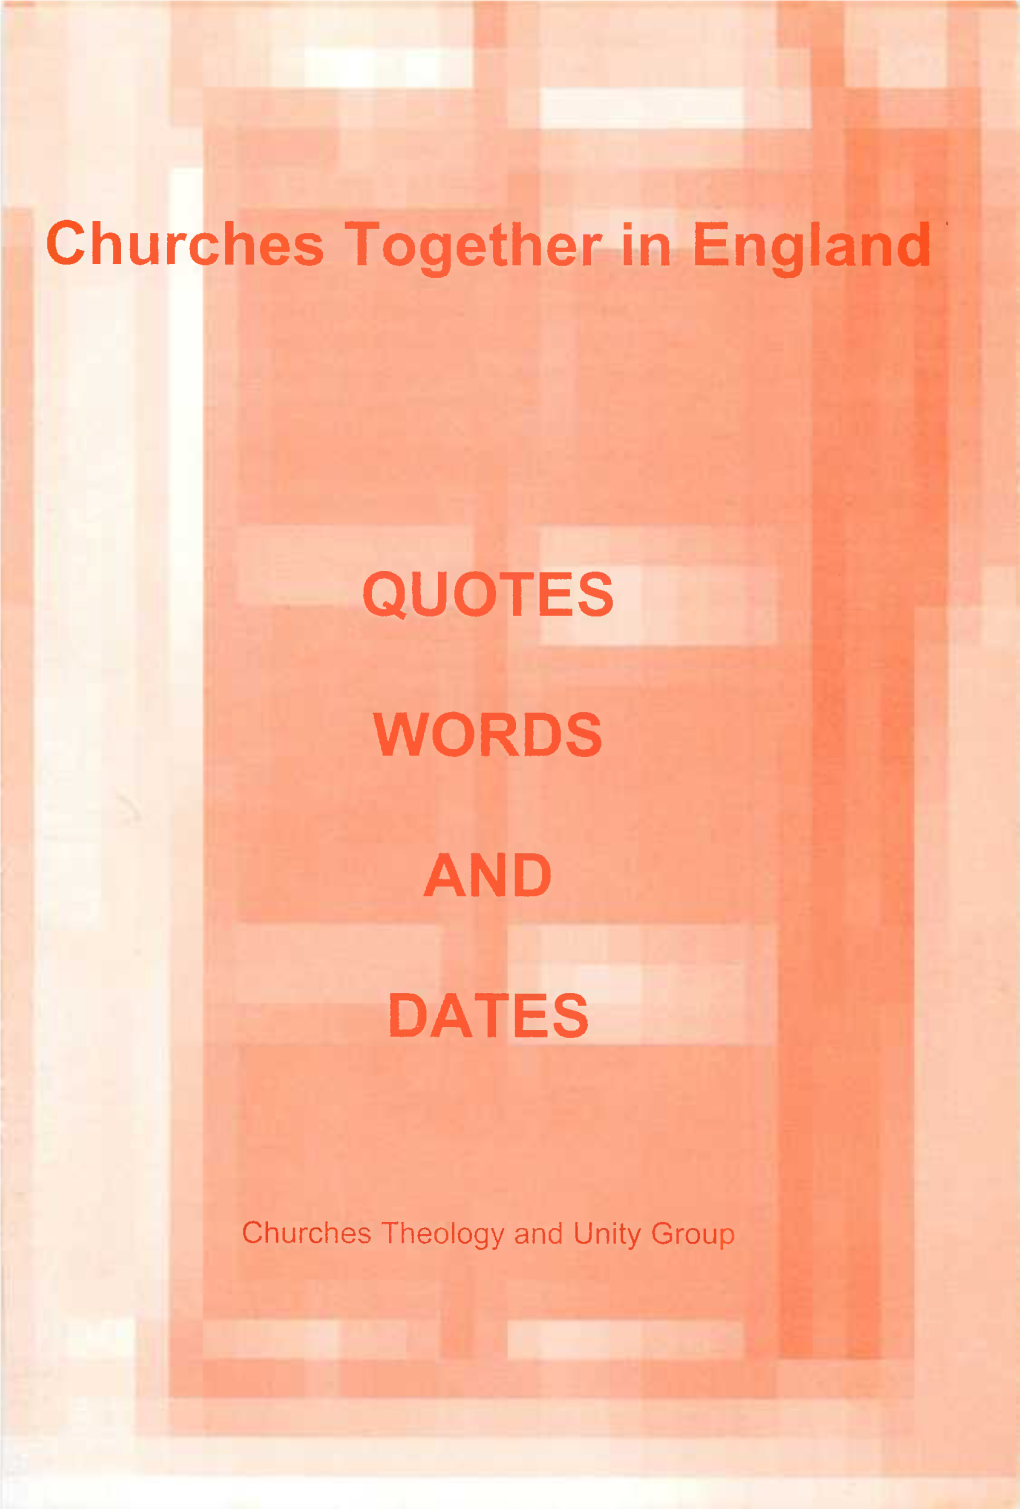 Churches Together in England QUOTES WORDS and DATES